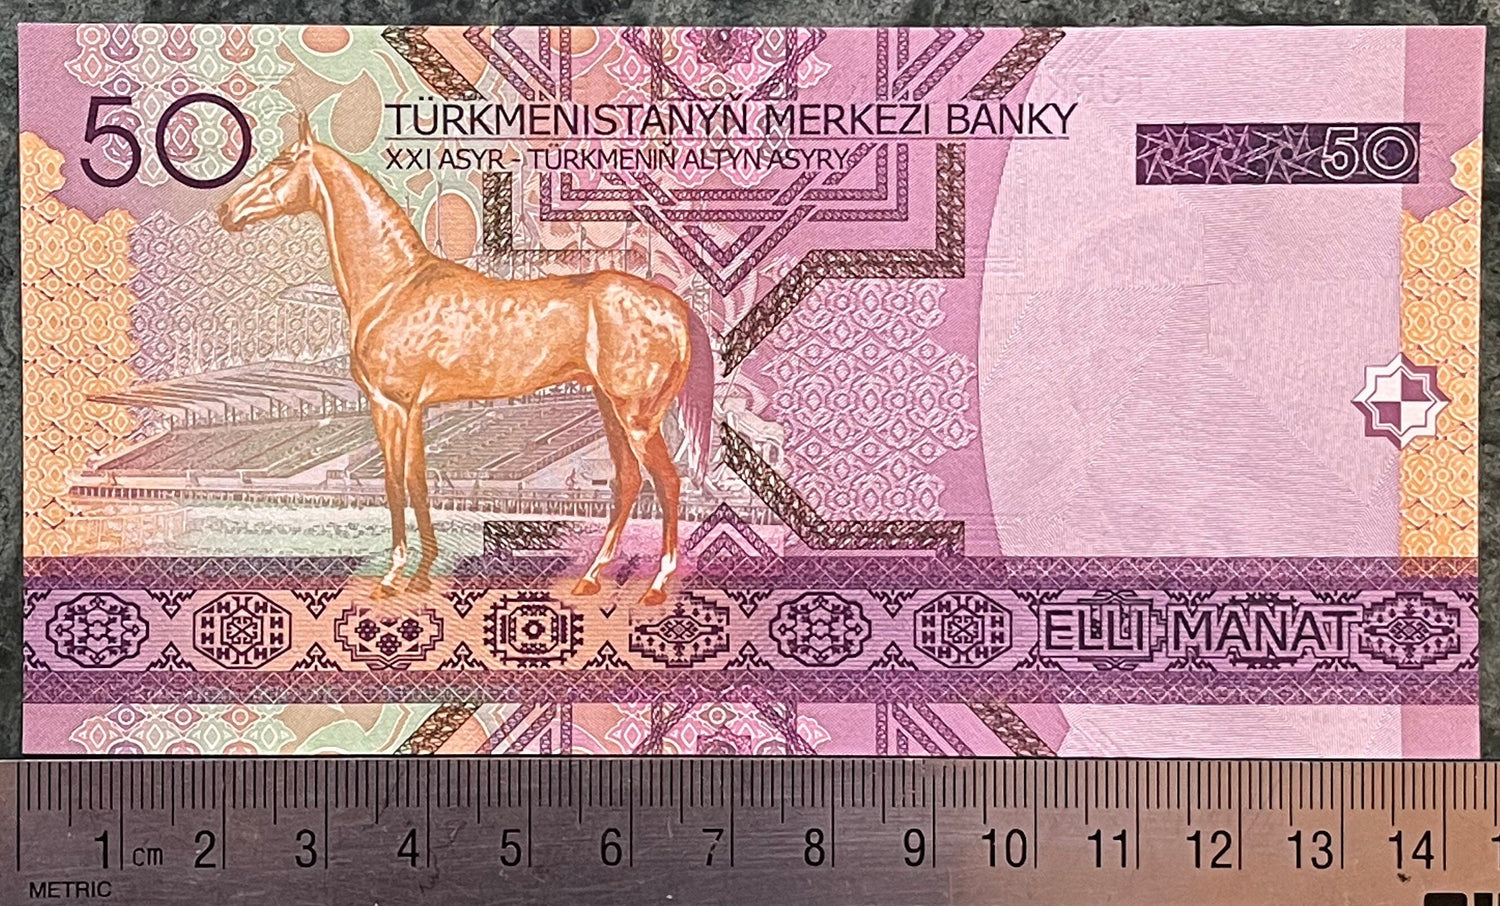 Akhal-Teke Golden Horse & Ashgabat Hippodrome Racecourse and Turkmenbashy 50 Manat Authentic Banknote for Jewelry and Collage